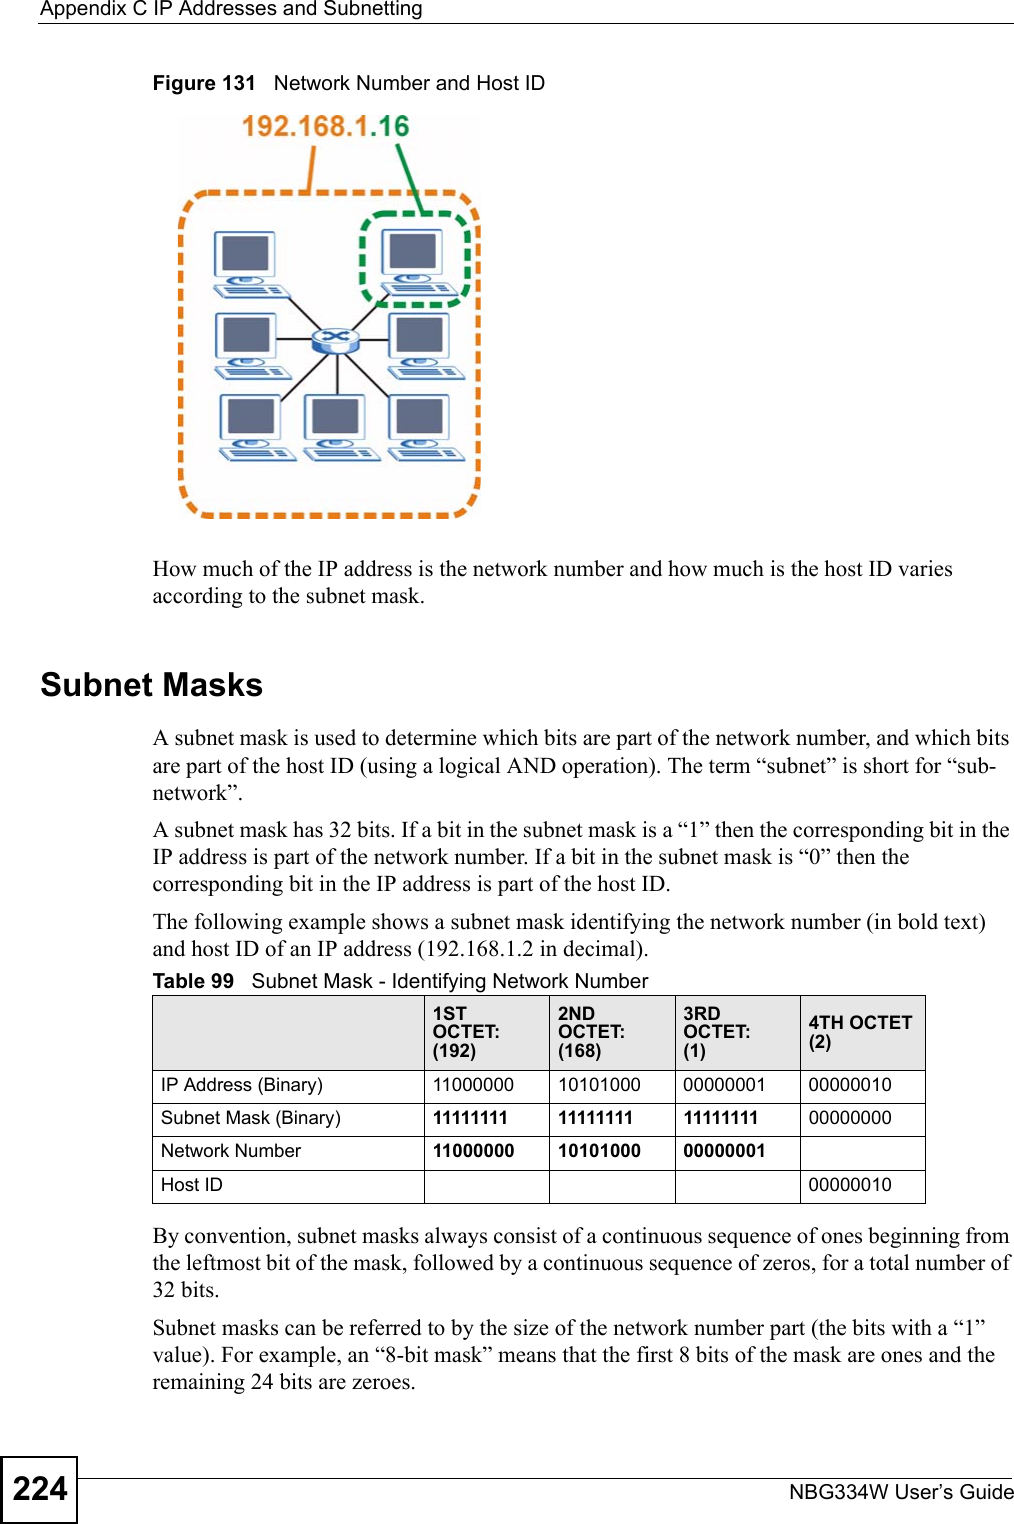 Appendix C IP Addresses and SubnettingNBG334W User’s Guide224Figure 131   Network Number and Host IDHow much of the IP address is the network number and how much is the host ID varies according to the subnet mask. Subnet MasksA subnet mask is used to determine which bits are part of the network number, and which bits are part of the host ID (using a logical AND operation). The term “subnet” is short for “sub-network”.A subnet mask has 32 bits. If a bit in the subnet mask is a “1” then the corresponding bit in the IP address is part of the network number. If a bit in the subnet mask is “0” then the corresponding bit in the IP address is part of the host ID. The following example shows a subnet mask identifying the network number (in bold text) and host ID of an IP address (192.168.1.2 in decimal).By convention, subnet masks always consist of a continuous sequence of ones beginning from the leftmost bit of the mask, followed by a continuous sequence of zeros, for a total number of 32 bits.Subnet masks can be referred to by the size of the network number part (the bits with a “1” value). For example, an “8-bit mask” means that the first 8 bits of the mask are ones and the remaining 24 bits are zeroes.Table 99   Subnet Mask - Identifying Network Number1ST OCTET:(192)2ND OCTET:(168)3RD OCTET:(1)4TH OCTET(2)IP Address (Binary) 11000000 10101000 00000001 00000010Subnet Mask (Binary) 11111111 11111111 11111111 00000000Network Number 11000000 10101000 00000001Host ID 00000010